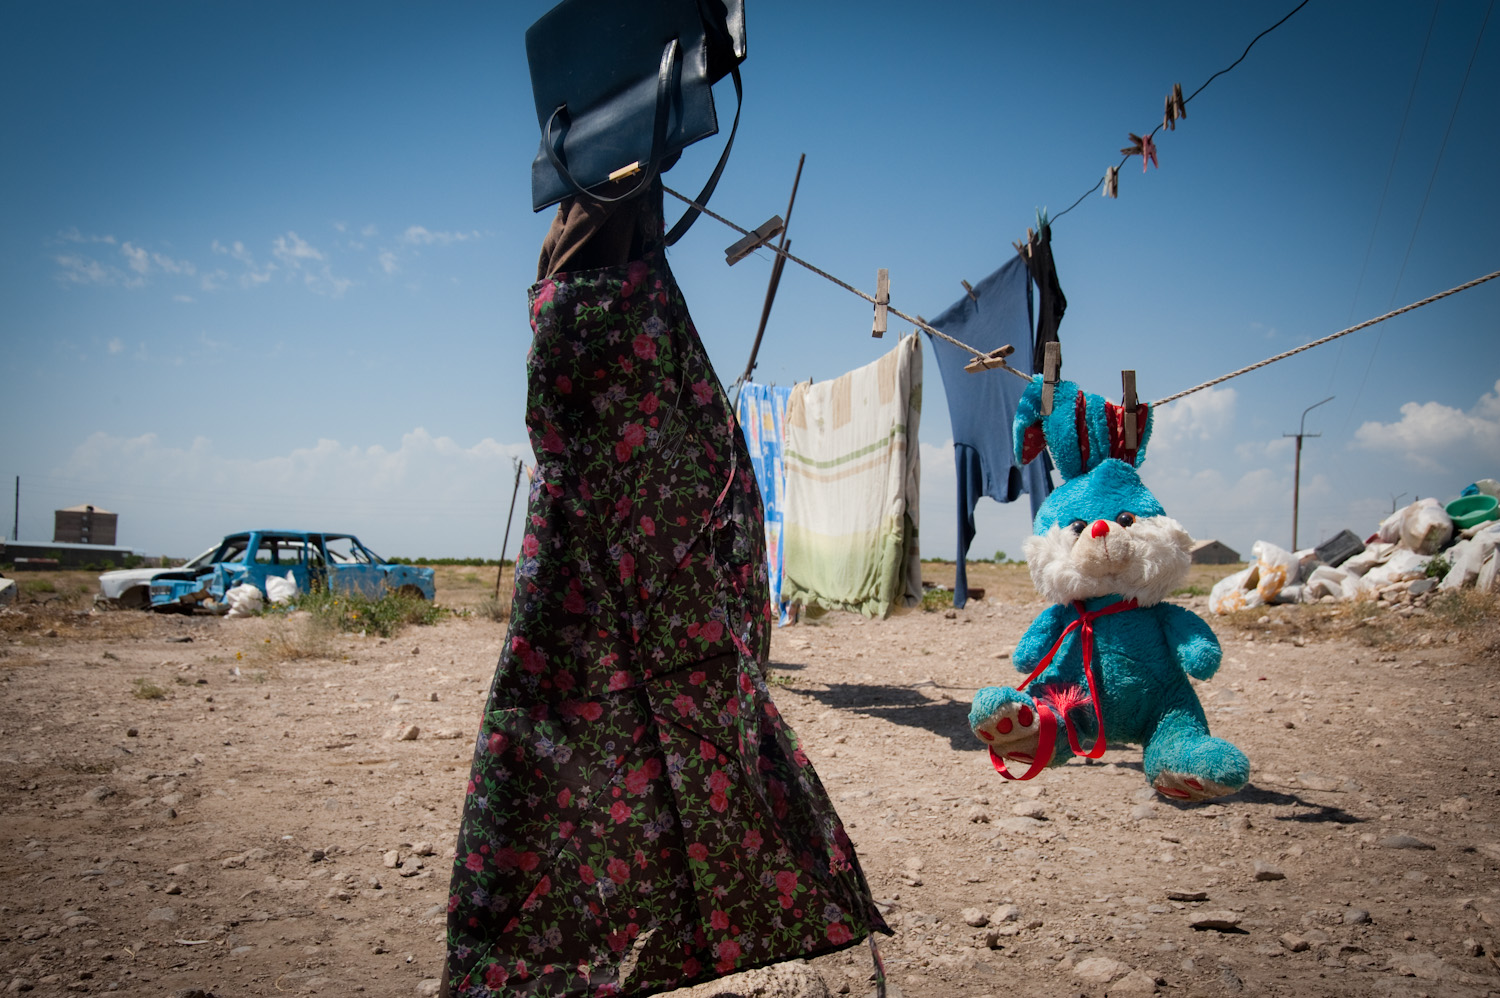  Ruzana and her 4 children live in a shack located in an open field close to the border with Turkey with a view of Mount Ararat. "We live in the middle of nowhere. If we scream, will anyone hear our voice?" She asked.  